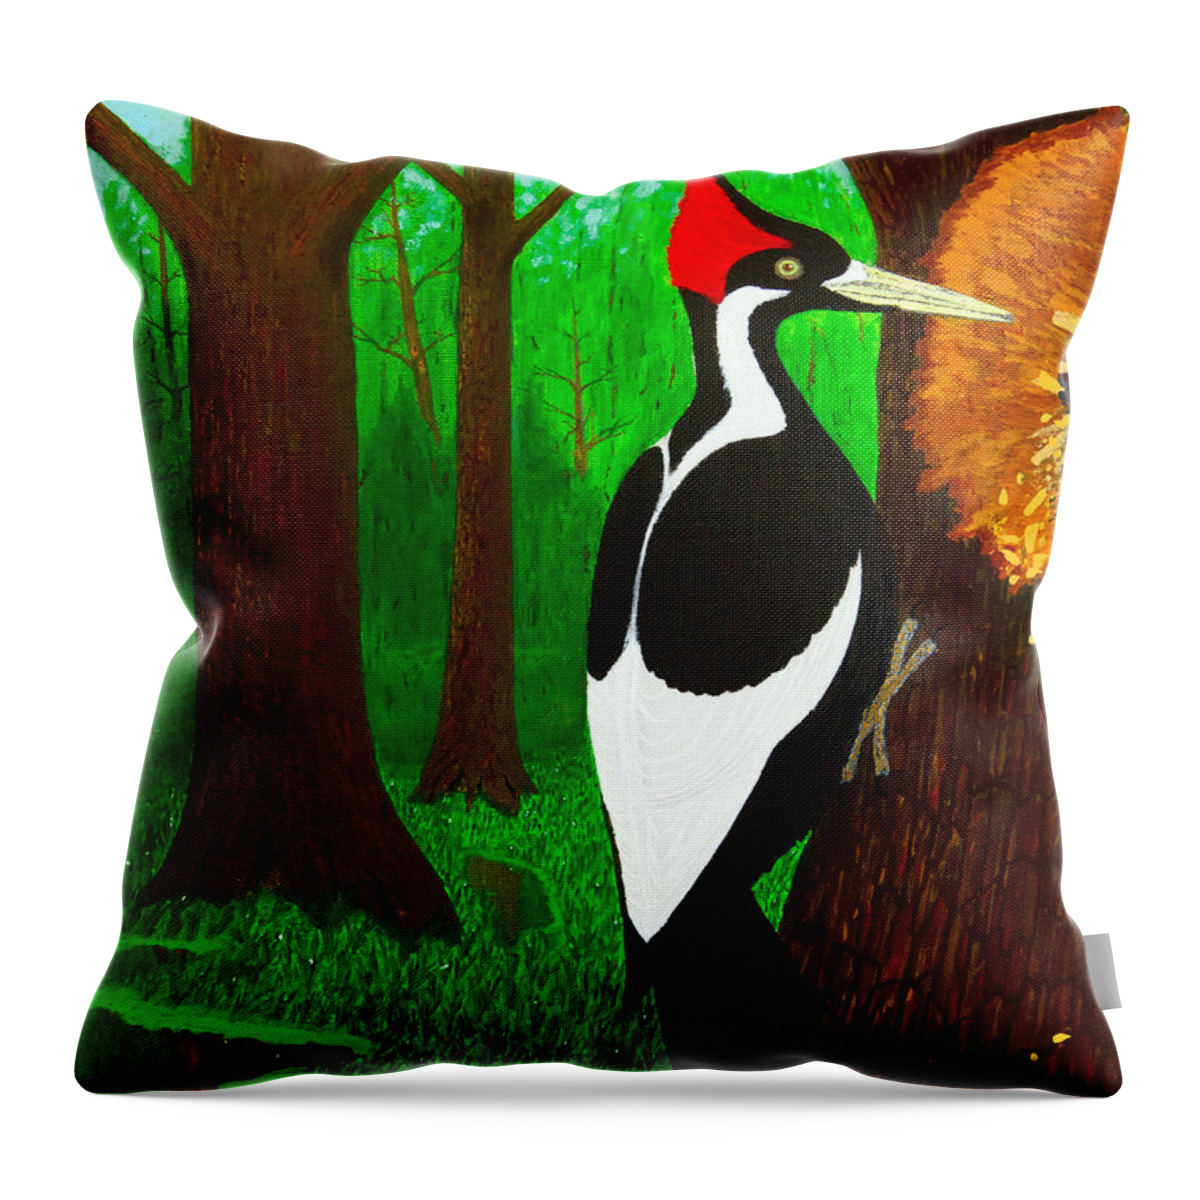 Ivory-billed Woodpecker Throw Pillow featuring the painting Ivory-Billed Woodpecker by L J Oakes